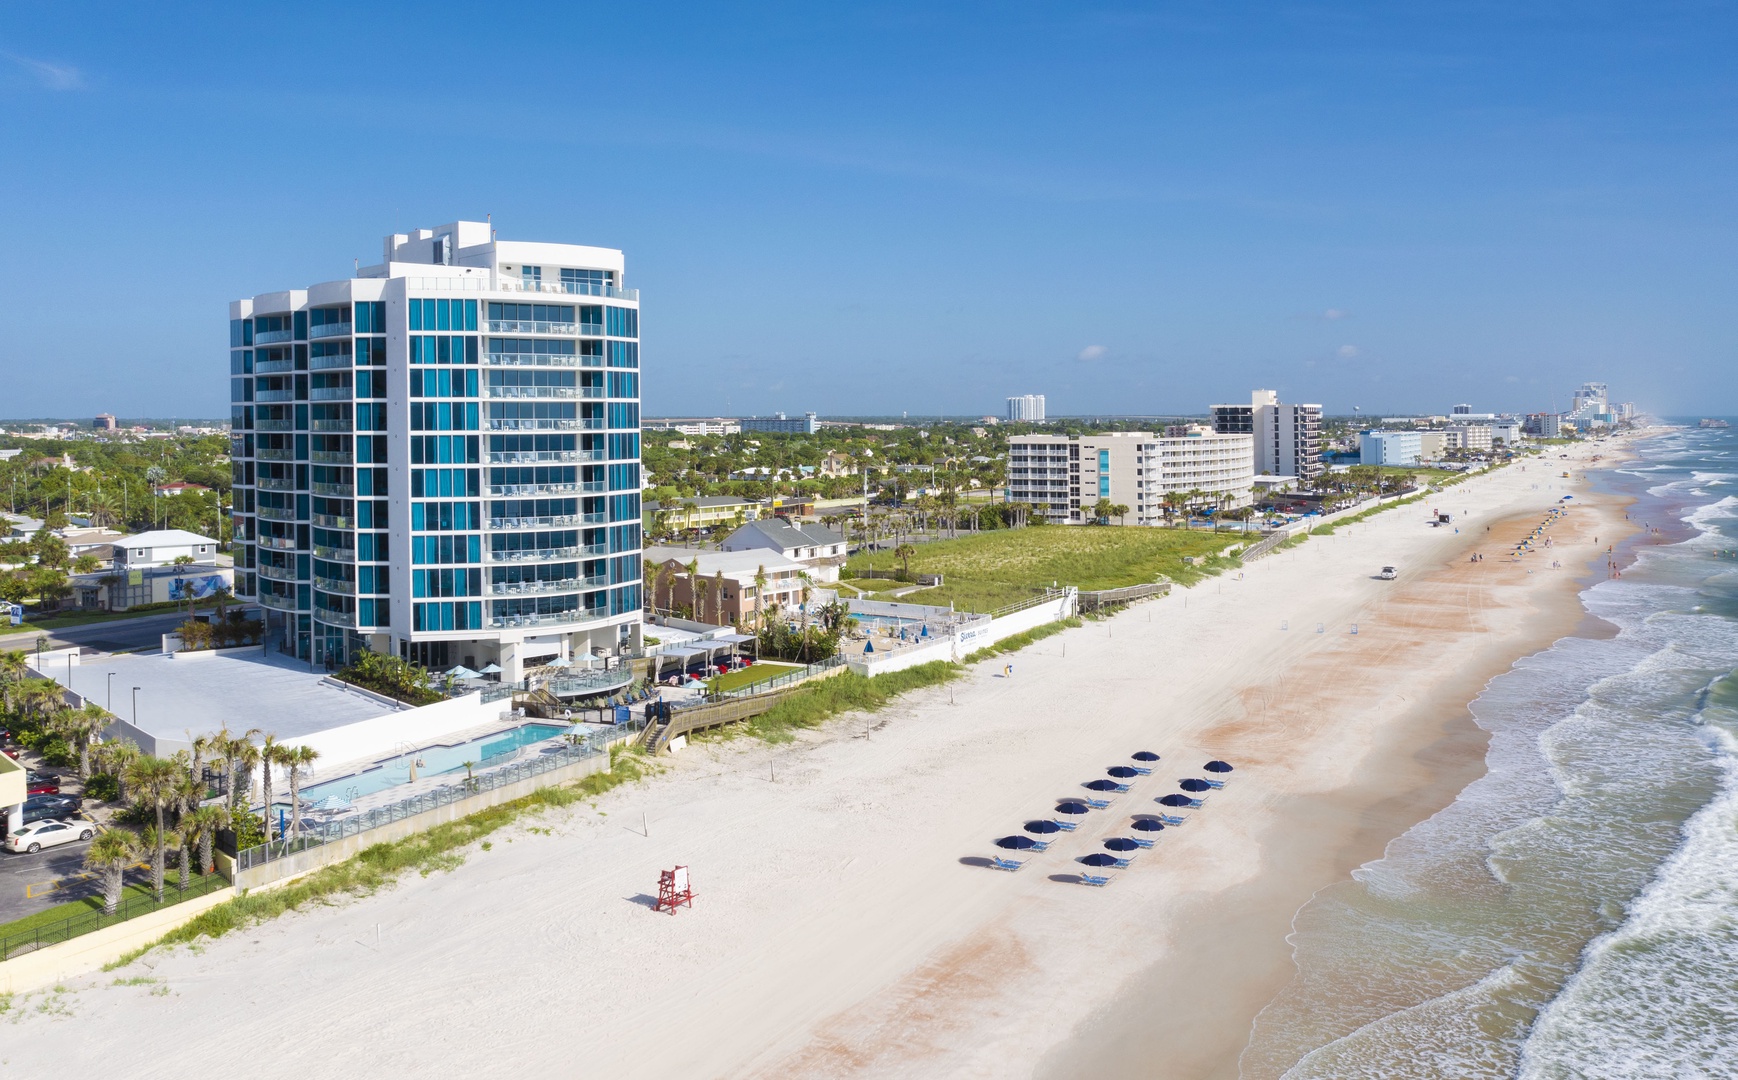 Experience the allure of Daytona Beach from the comfort of your exclusive haven